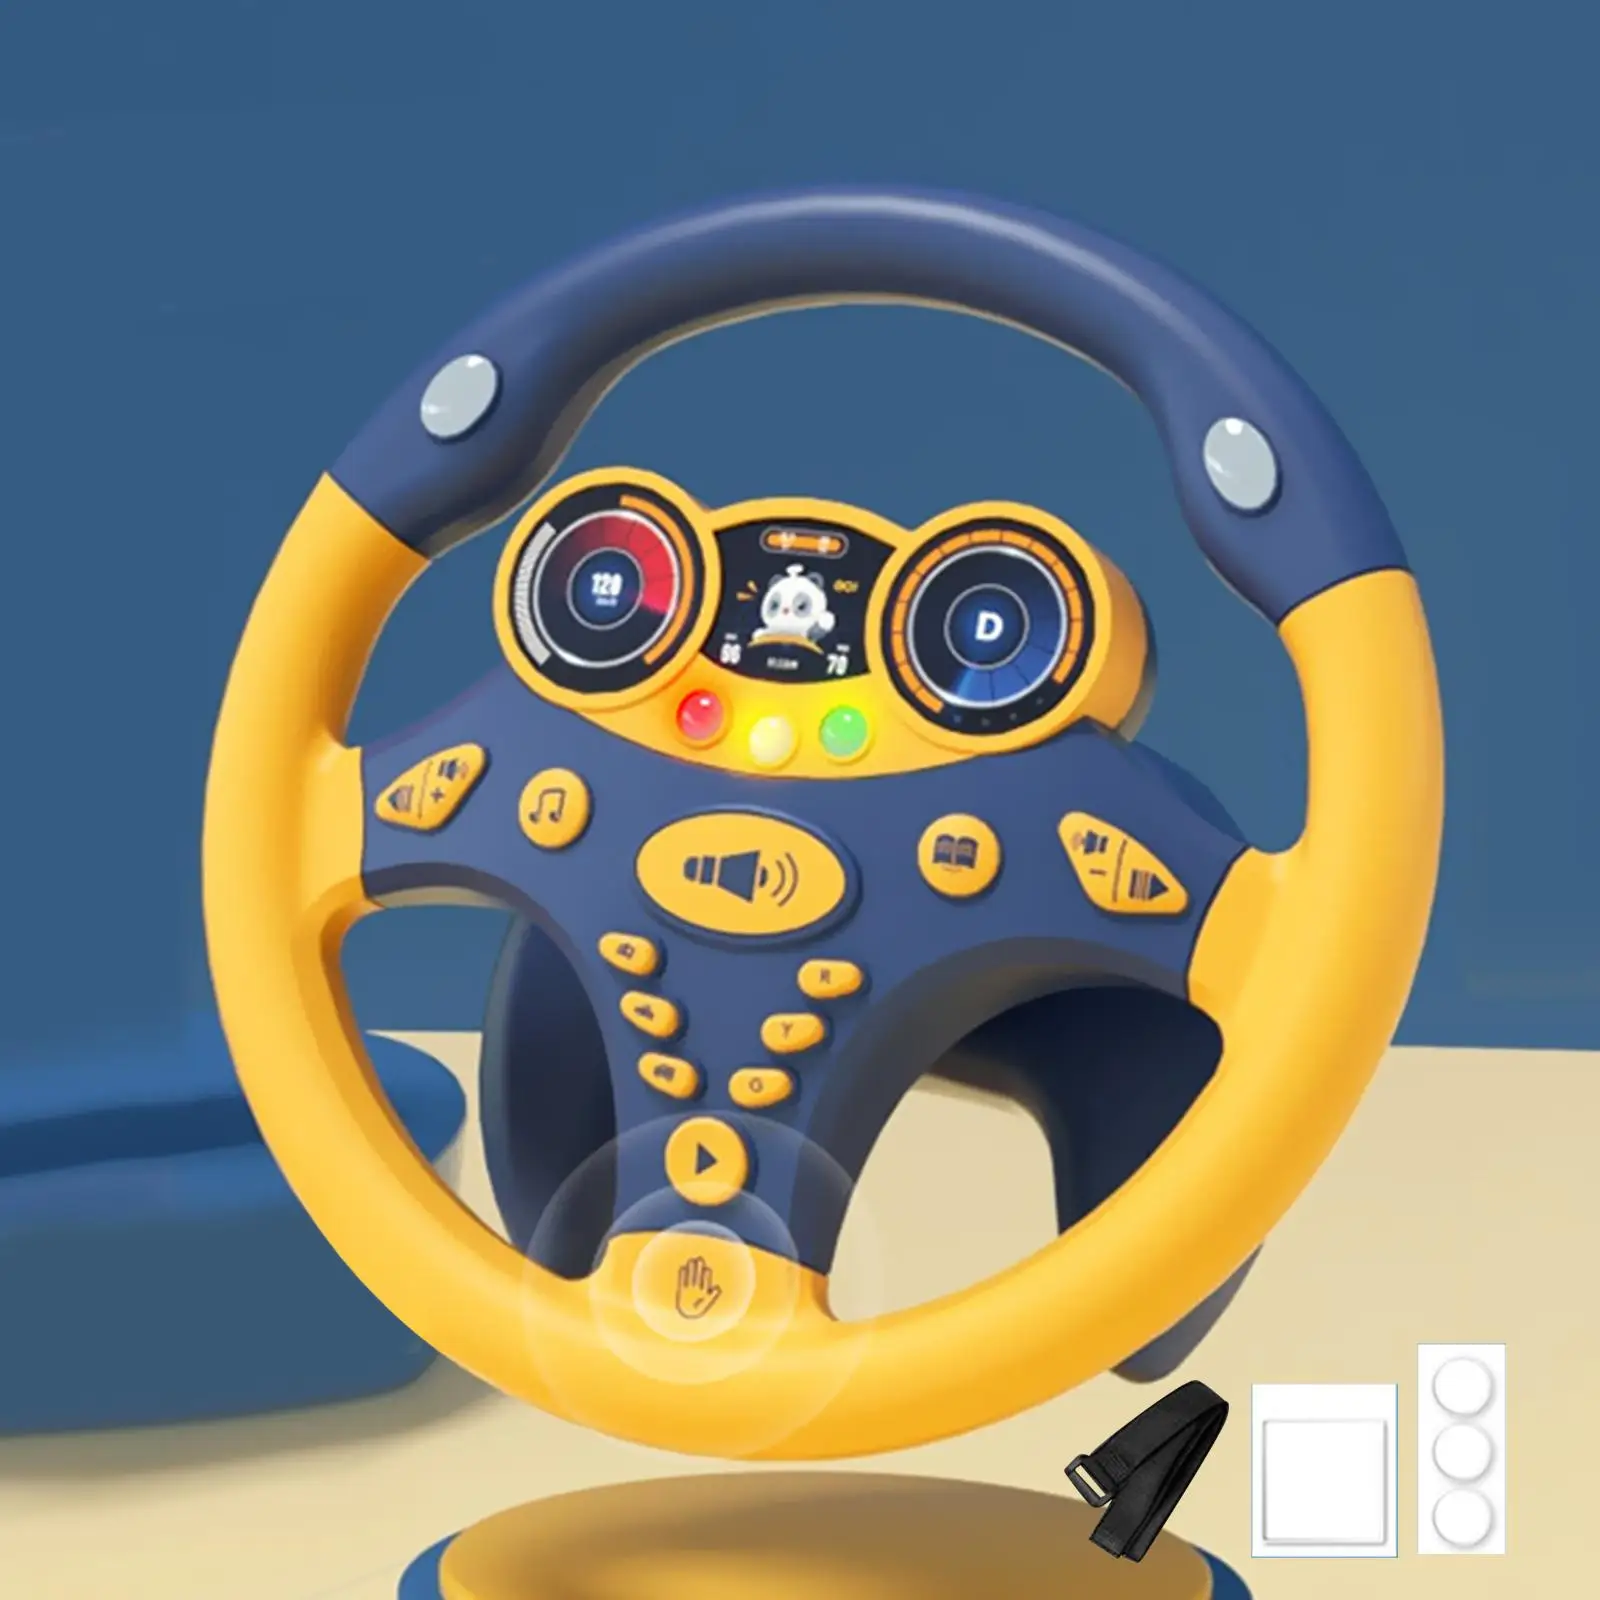 Toddlers Simulation Steering Wheel Toy Portable Pretend Play Toy for Kids